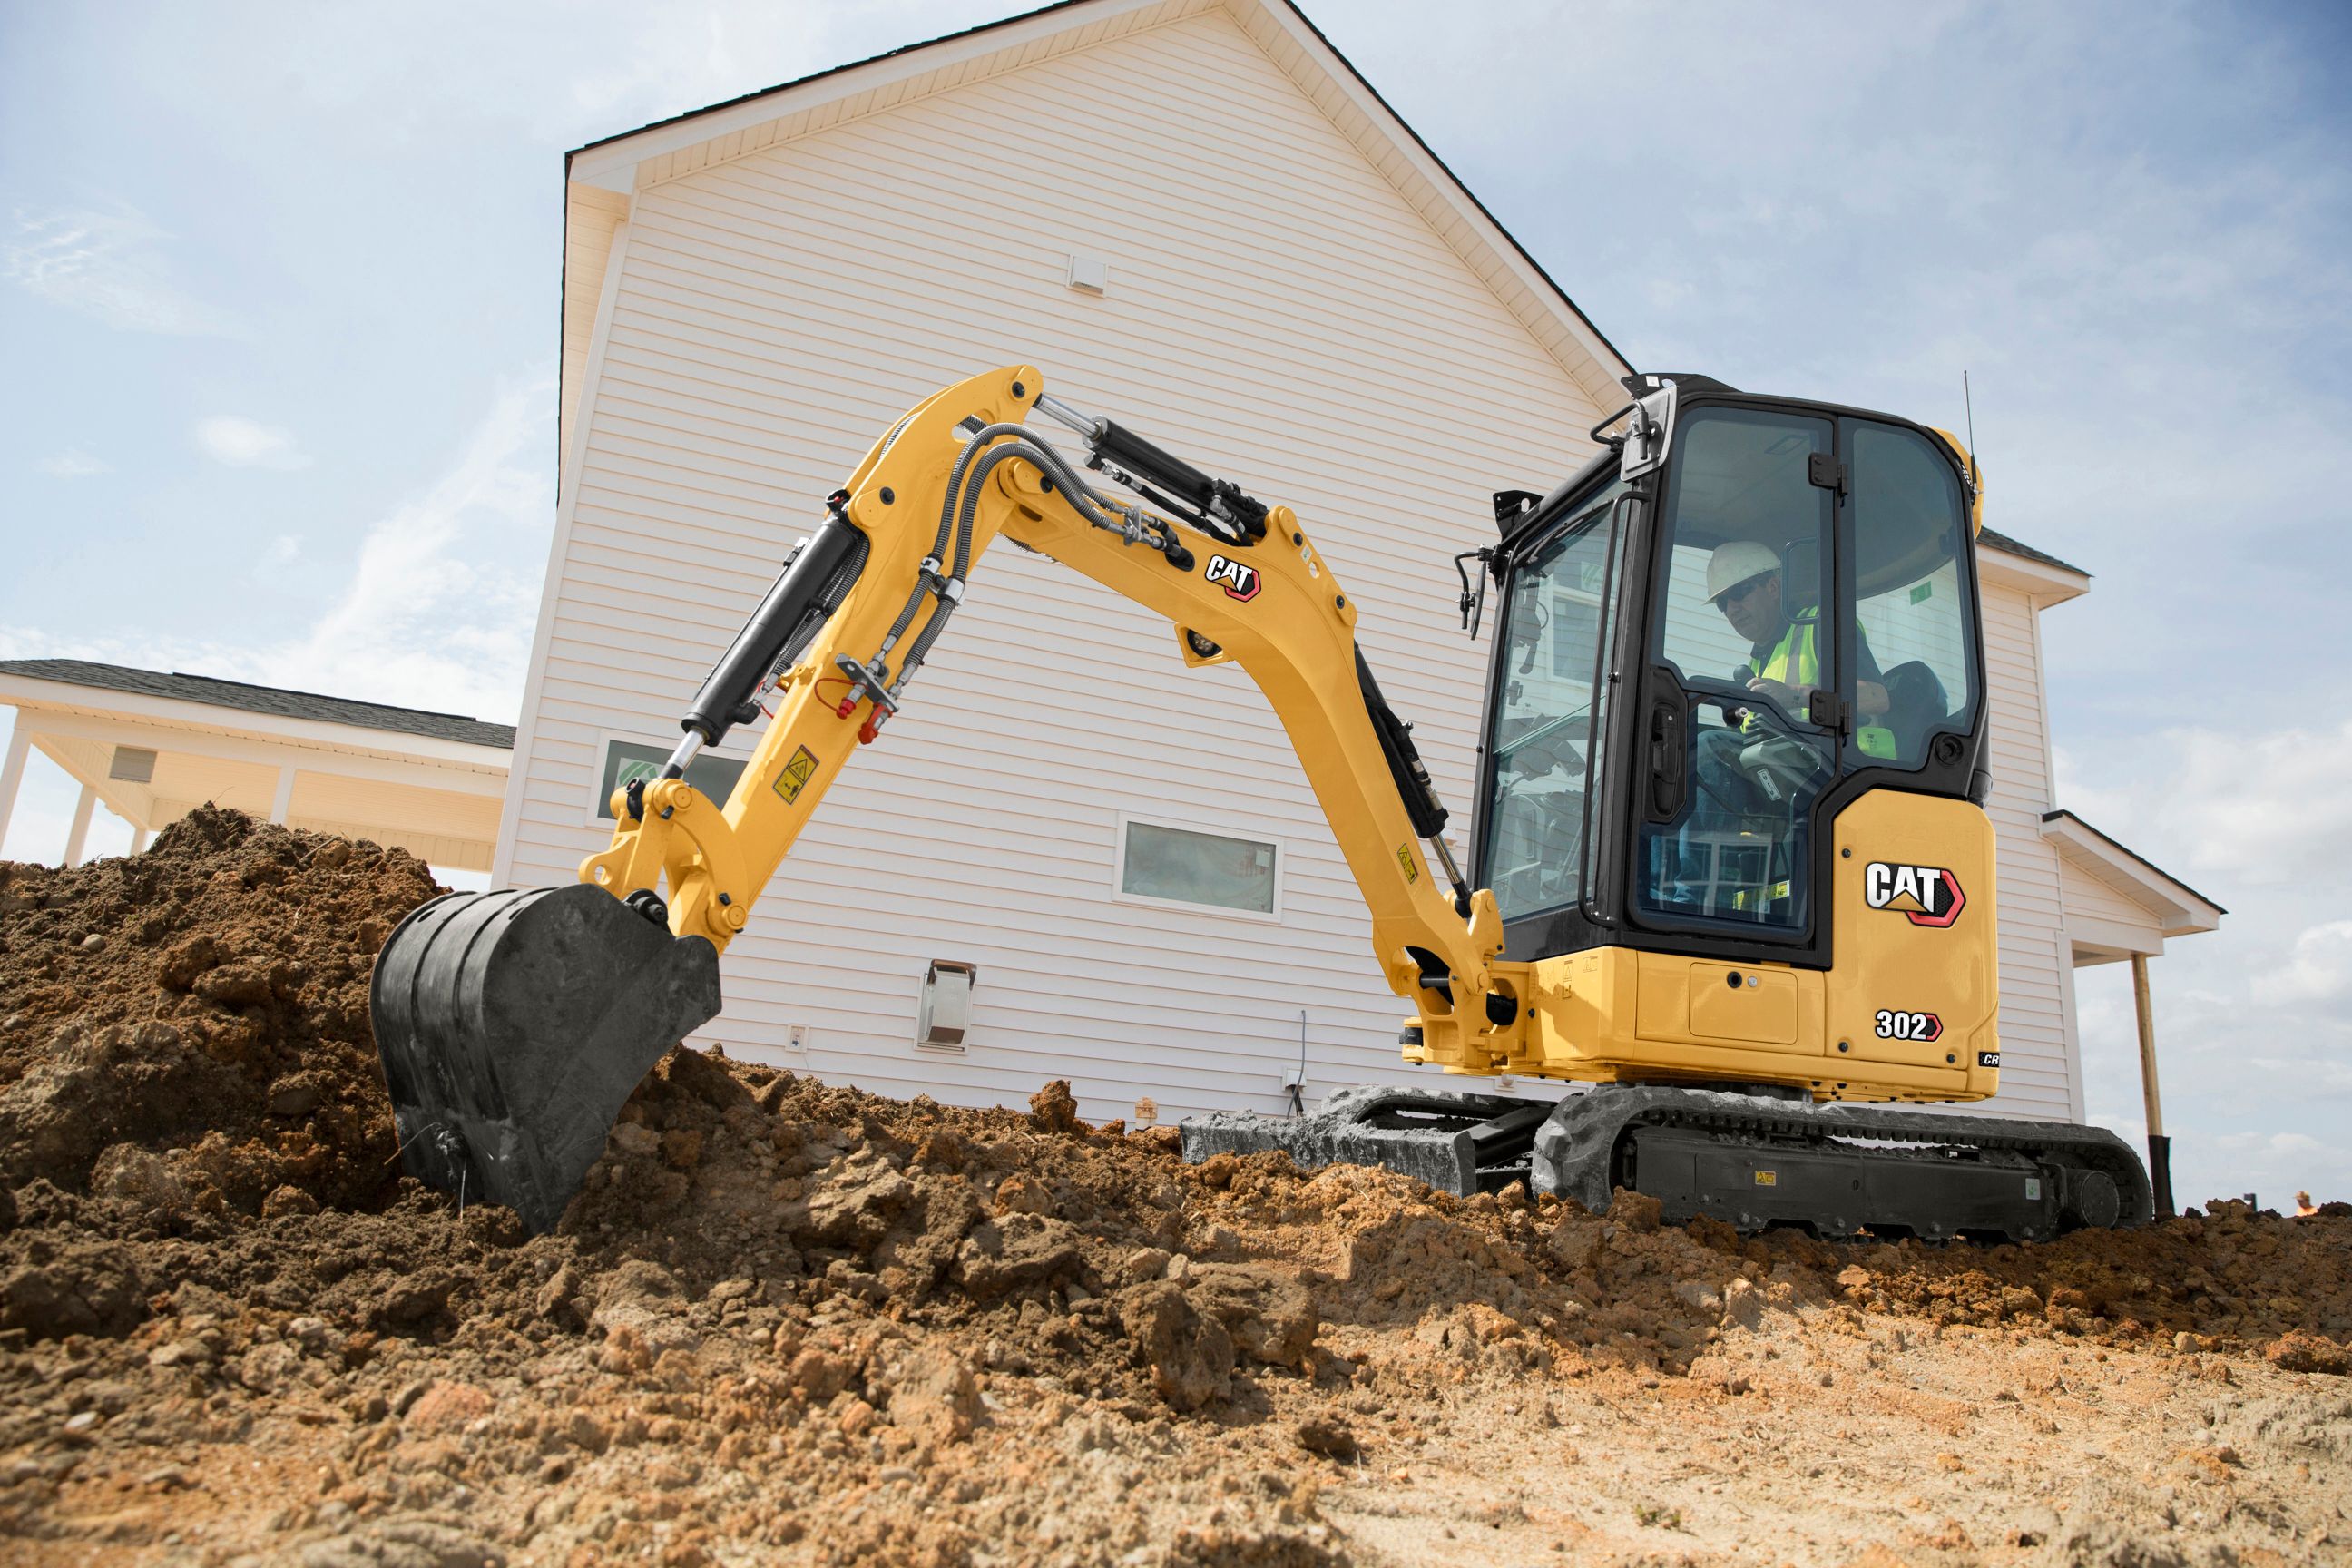 Find Used Construction Equipment at Cat Used